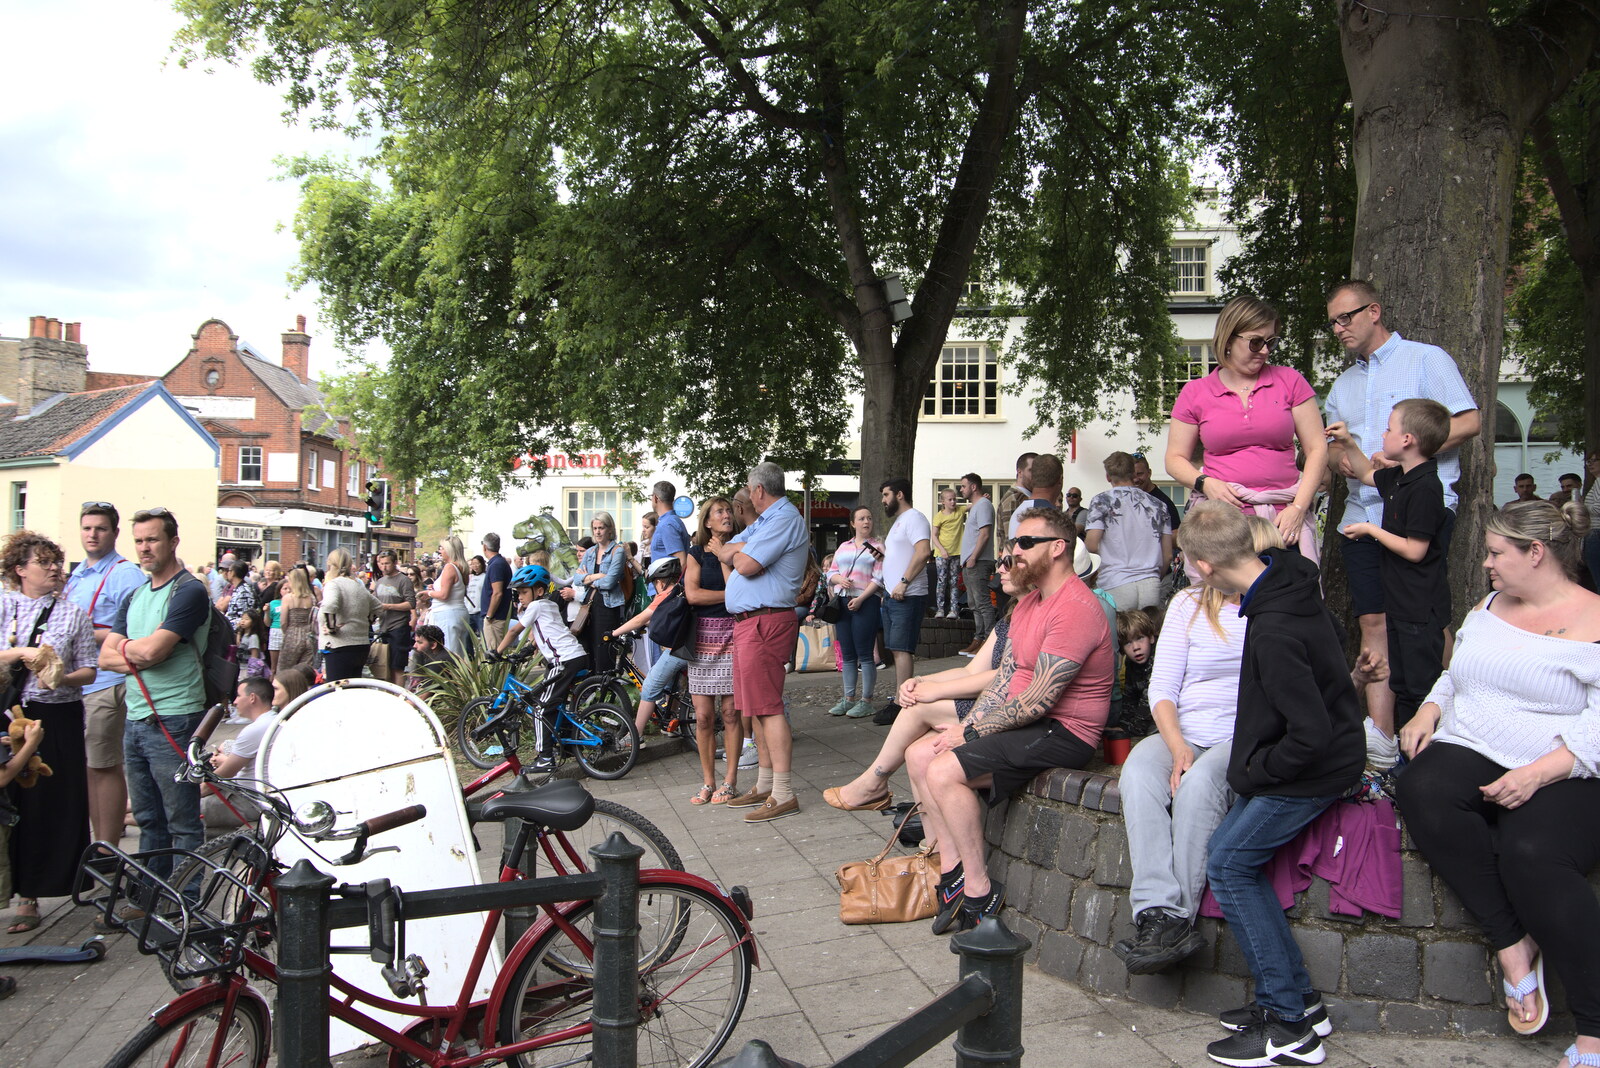 Crowds on the bottom of Timber Hill from The Lord Mayor's Procession, Norwich, Norfolk - 2nd July 2022